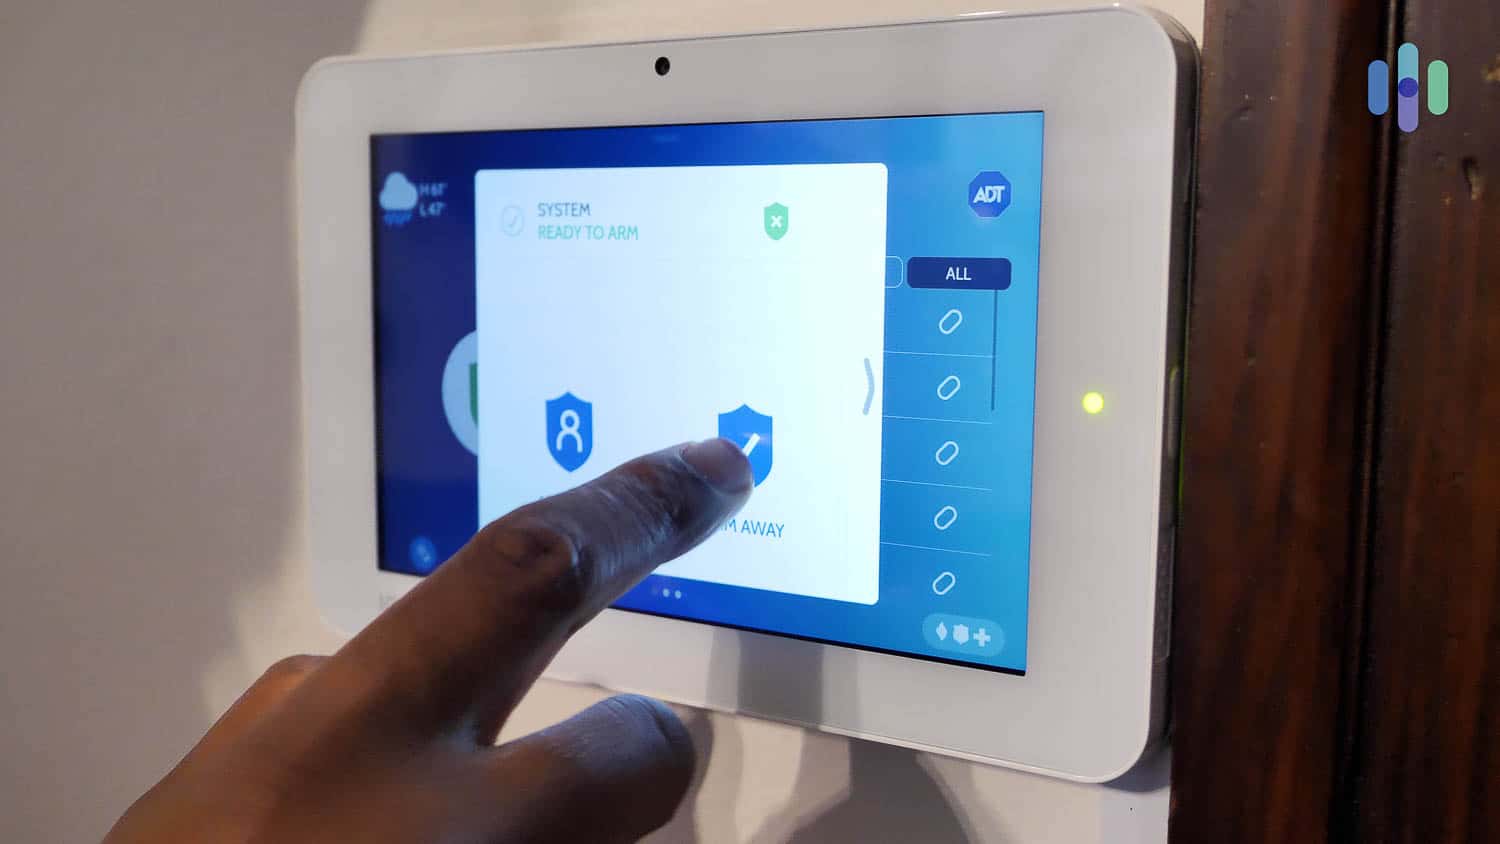 Arming the ADT Home Security Control Panel